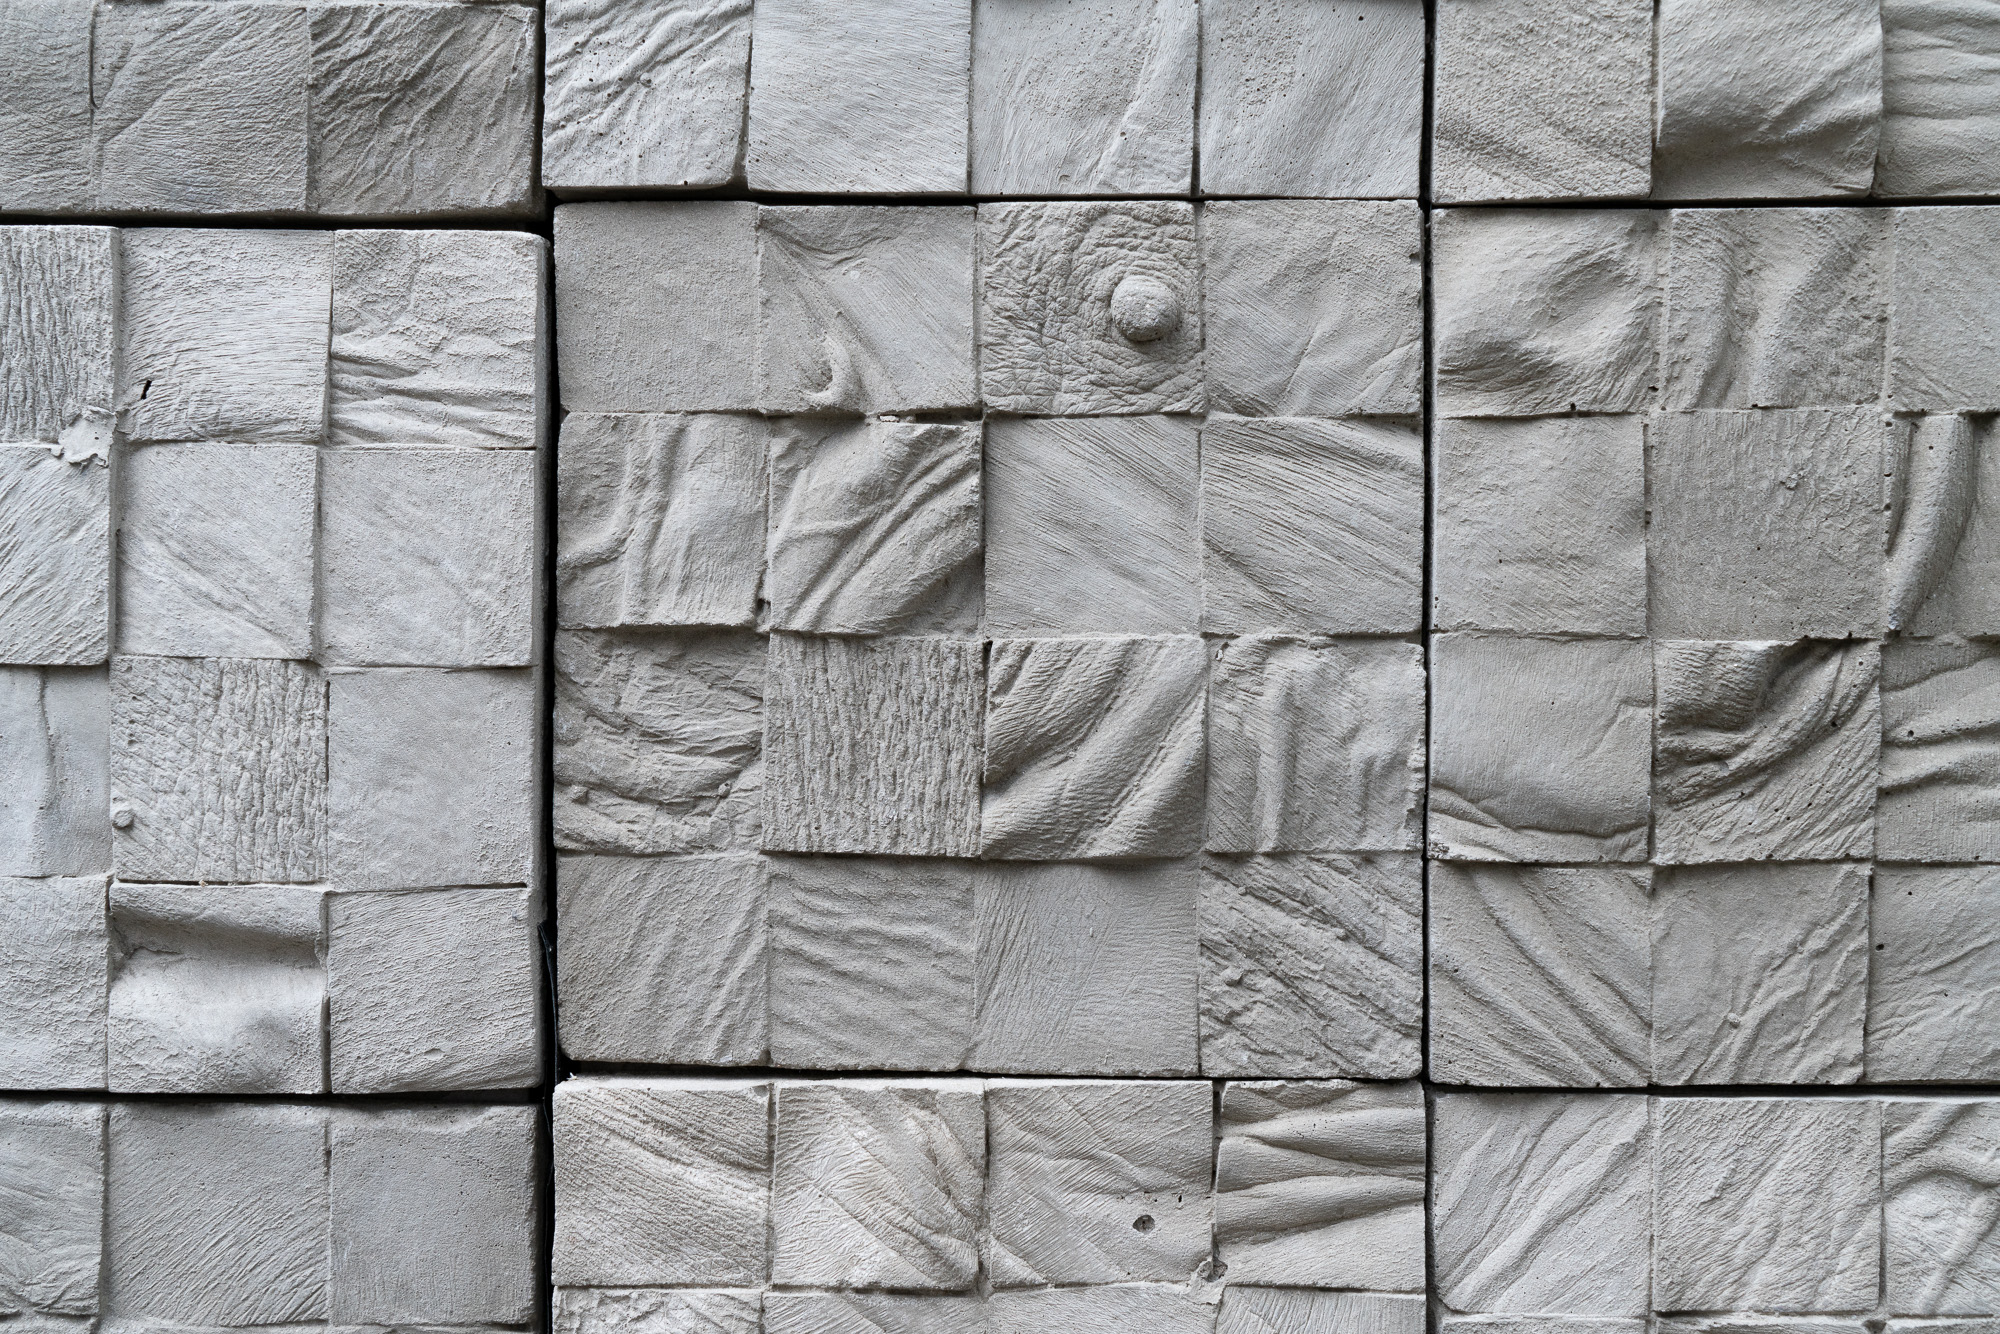 Featured image: Selva Aparicio, Entre Nosotros (Among Us) Detail, 2020. Concrete tiles cast from human cadavers. The images show a close up of the piece, showing details of a grid of square, concrete blocks. Each block has different folds, and one shows a nipple, all cast from human parts. Photo by Robert Chase Heishman. Image courtesy of the artist.